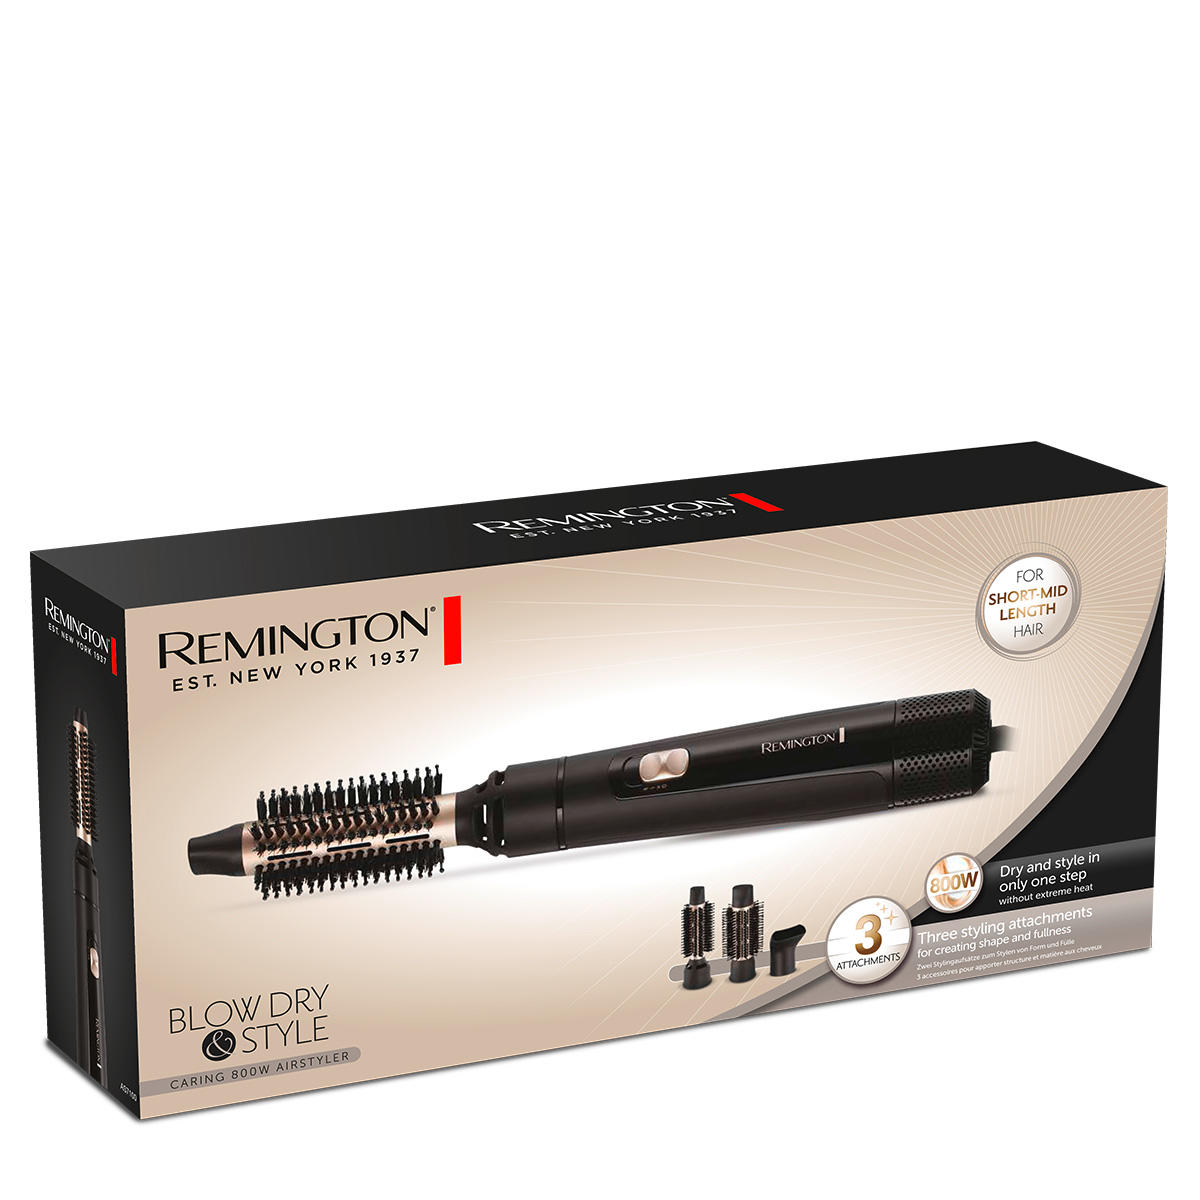 Remington AS7300 Blow Dry & Style Warm Air Brush  - 2